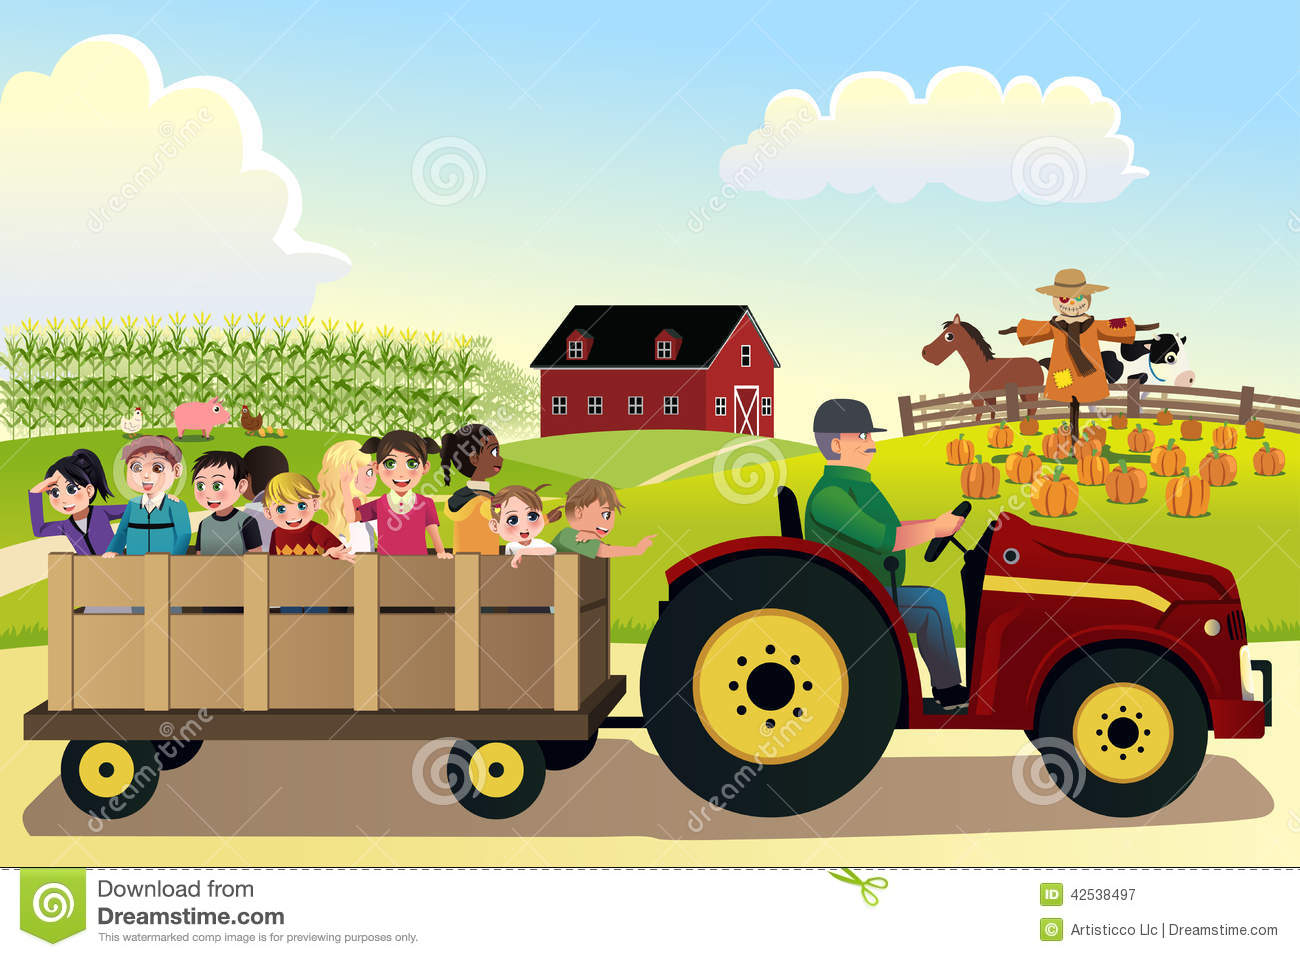 Vector Illustration Of Kids Going On A Hayride In A Farm With Corn